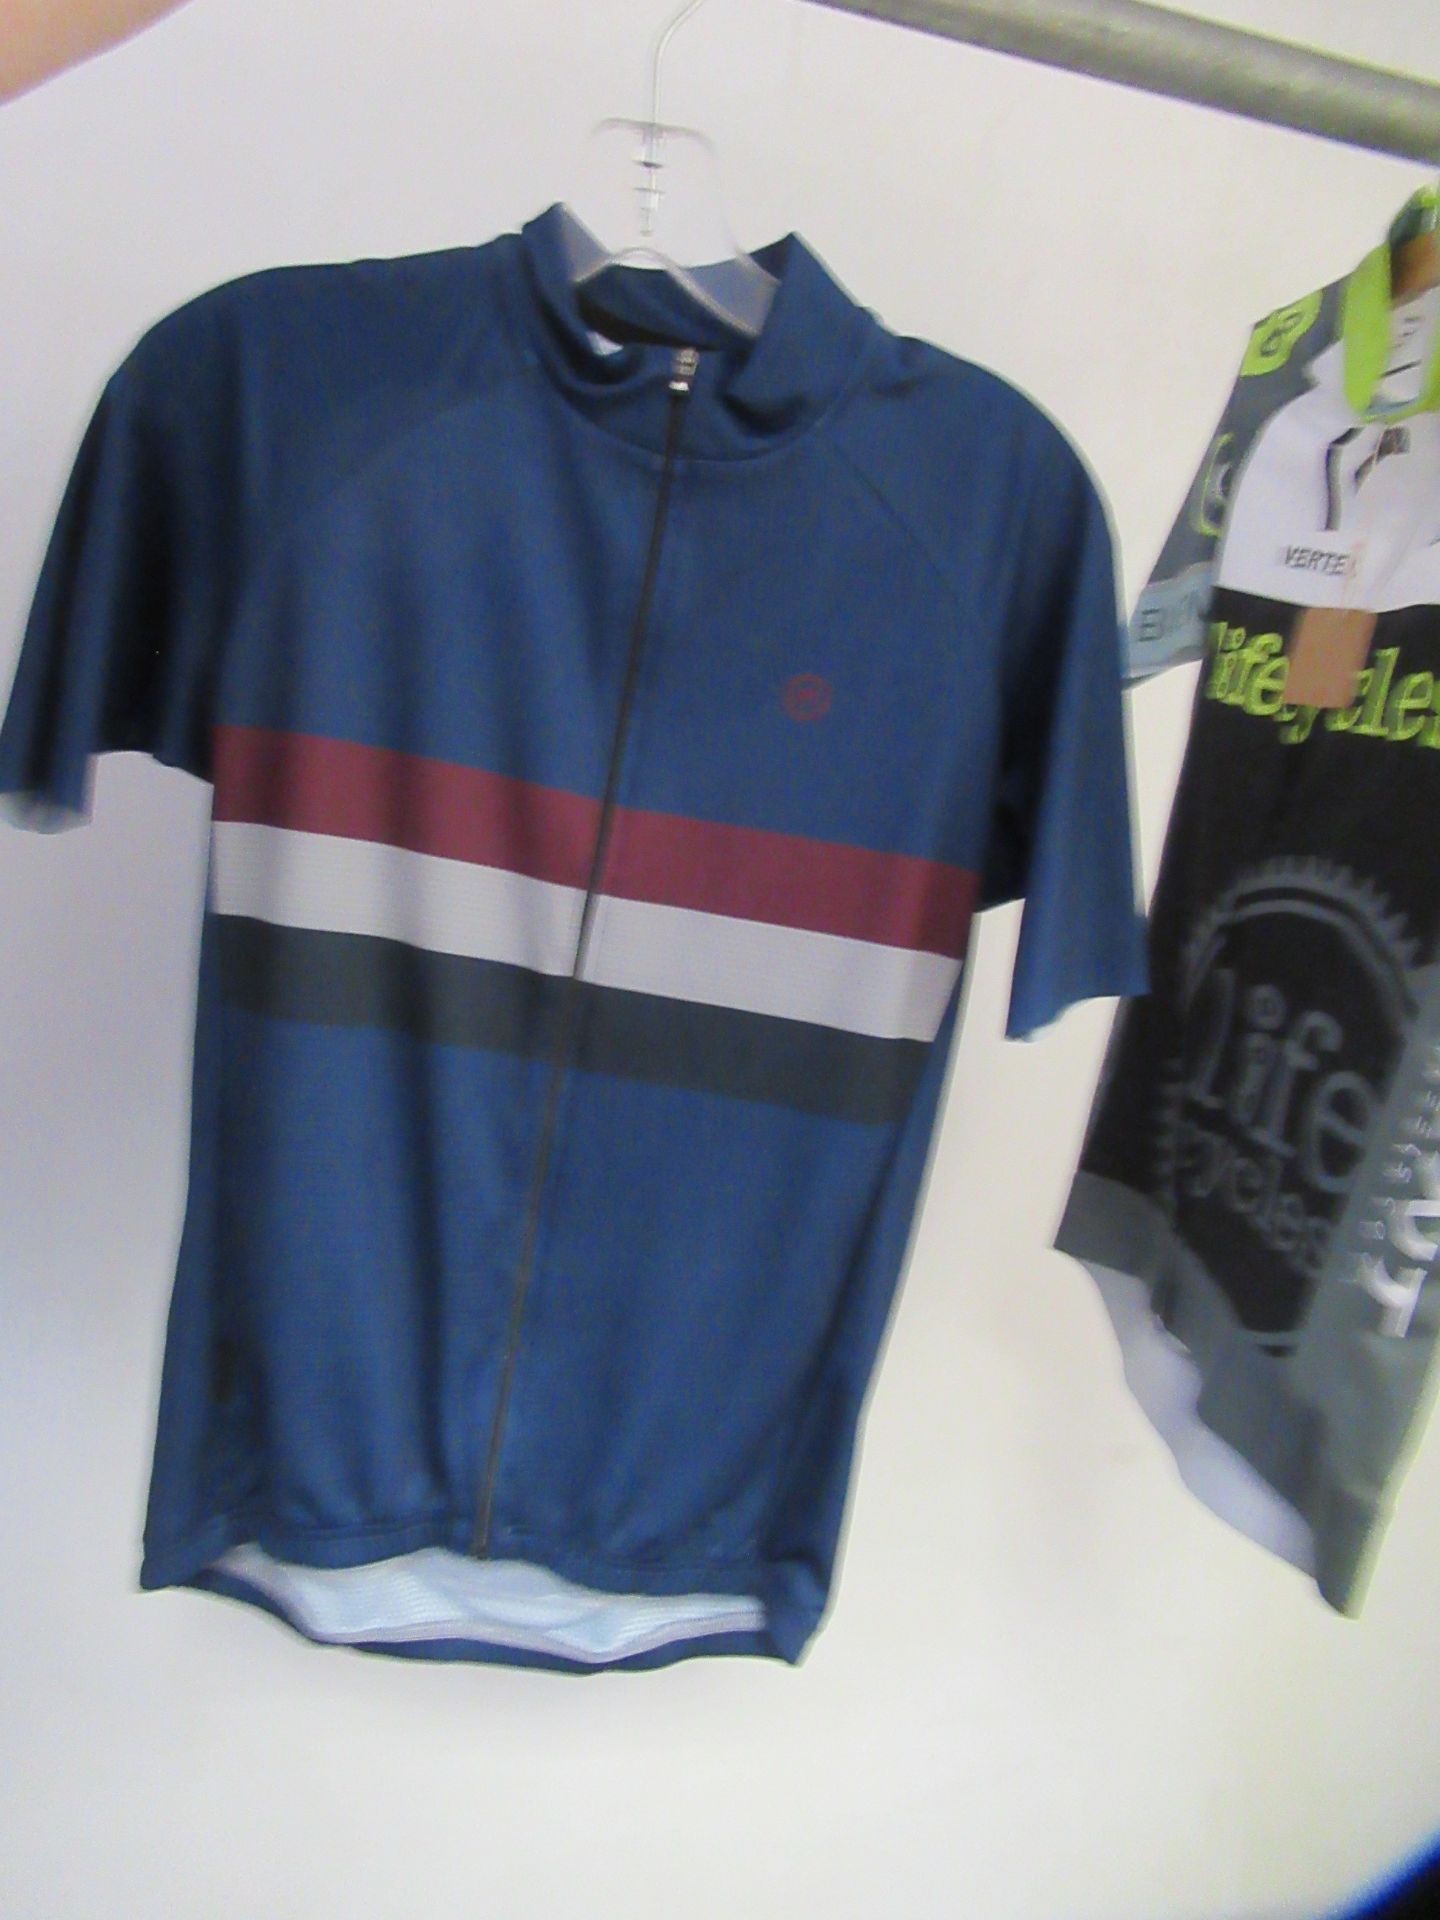 M Male Cycling Clothes - Image 5 of 6